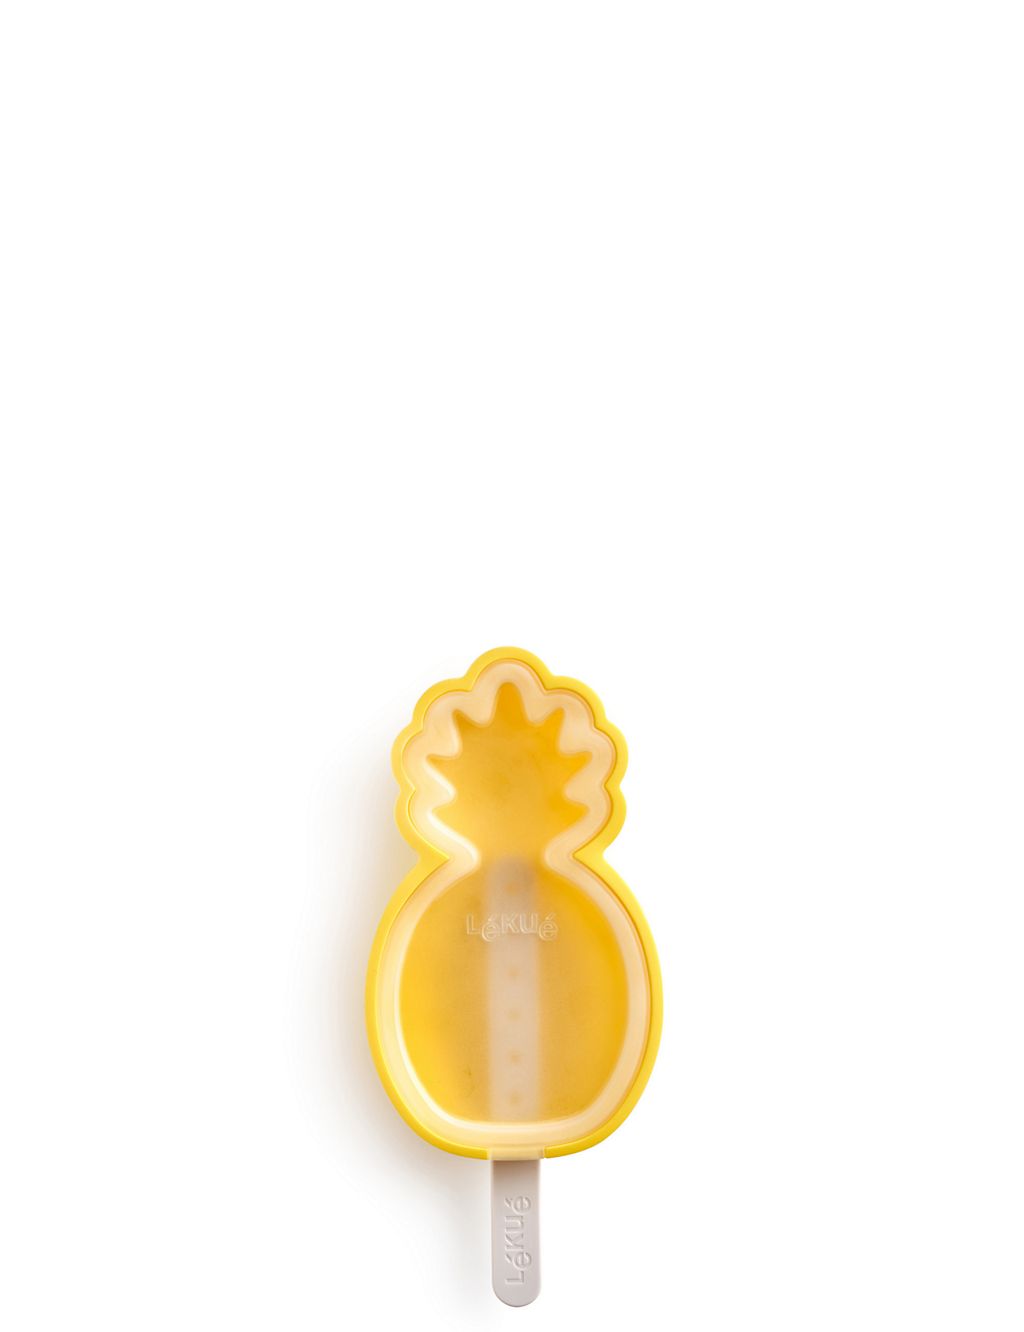 Set of 4 Fruity Lolly Moulds 1 of 4